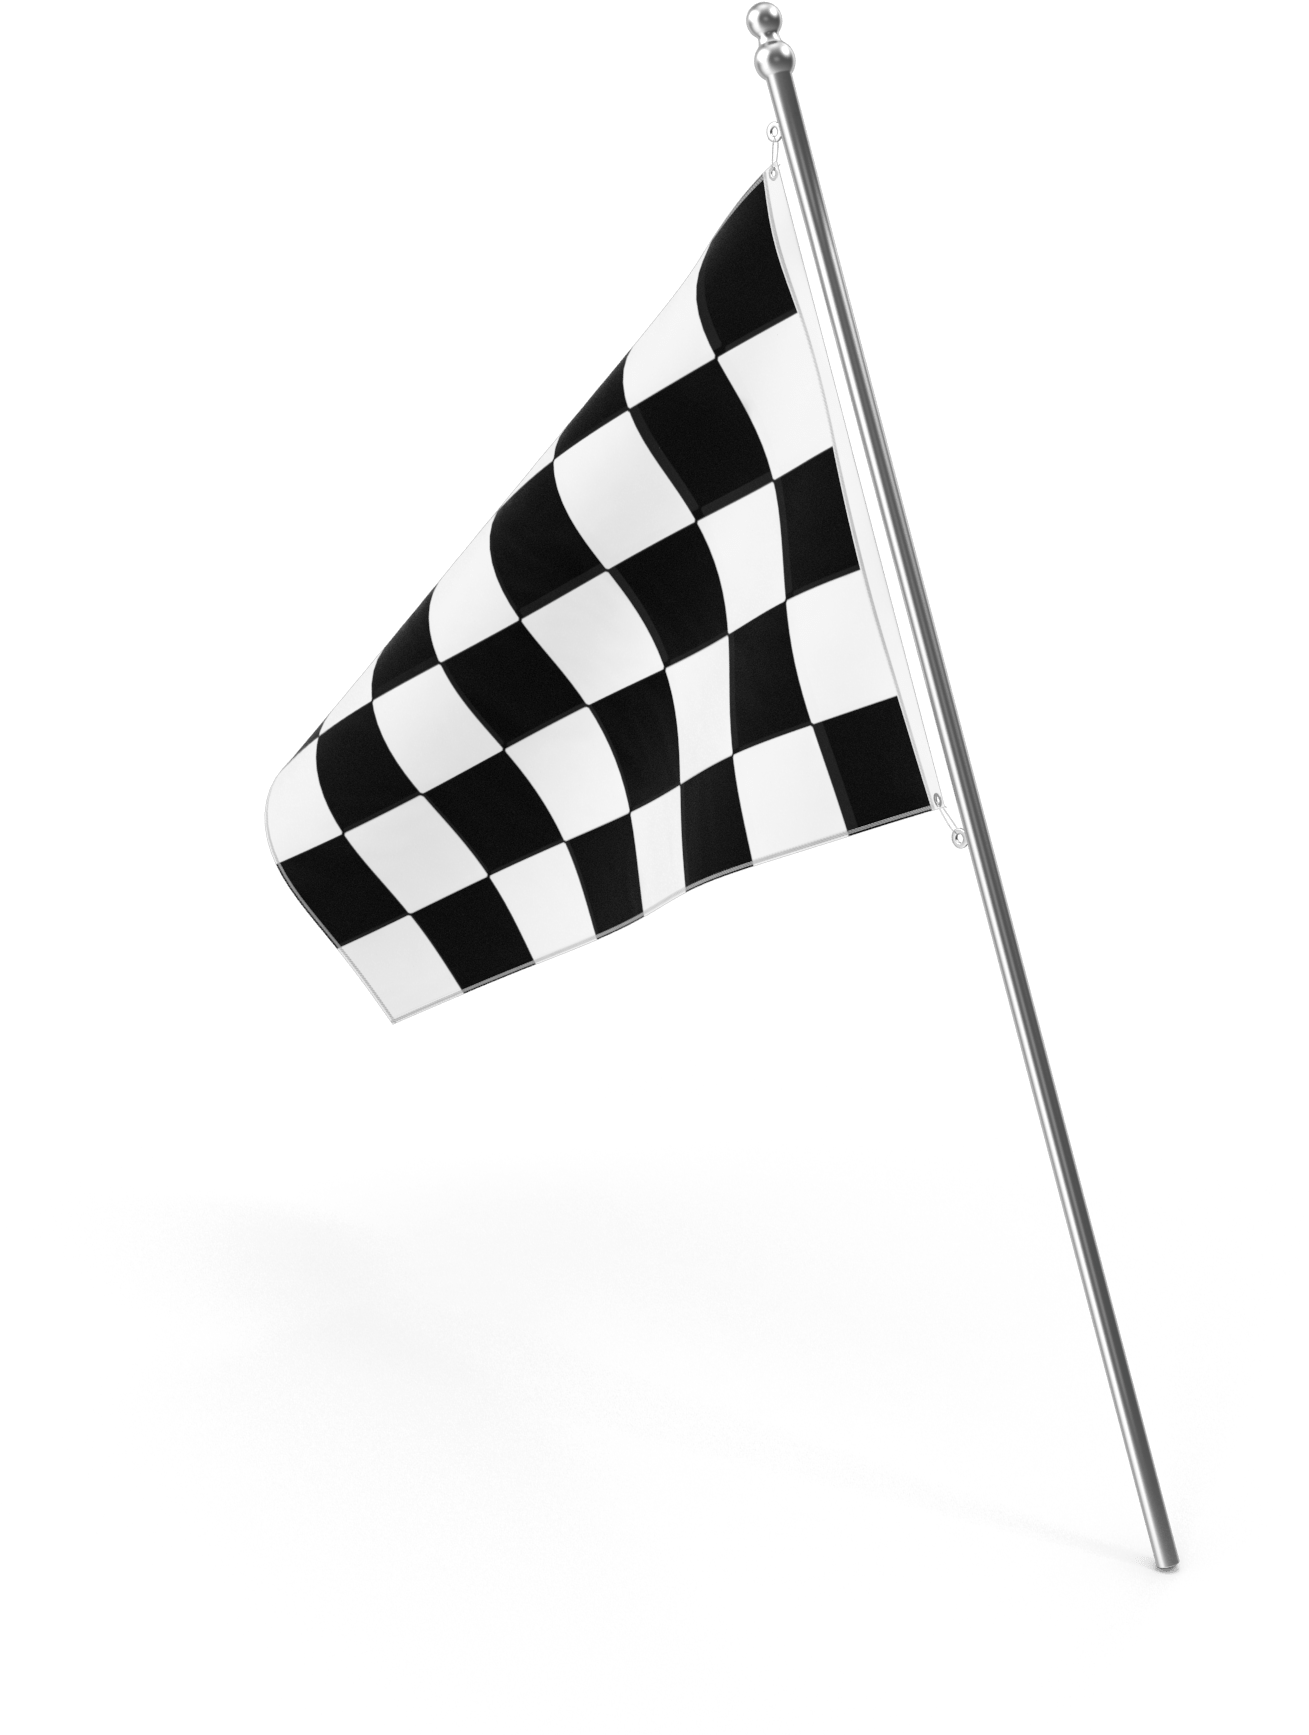 Nascar & Racing Cards - Flag Of The United States (2048x2048)